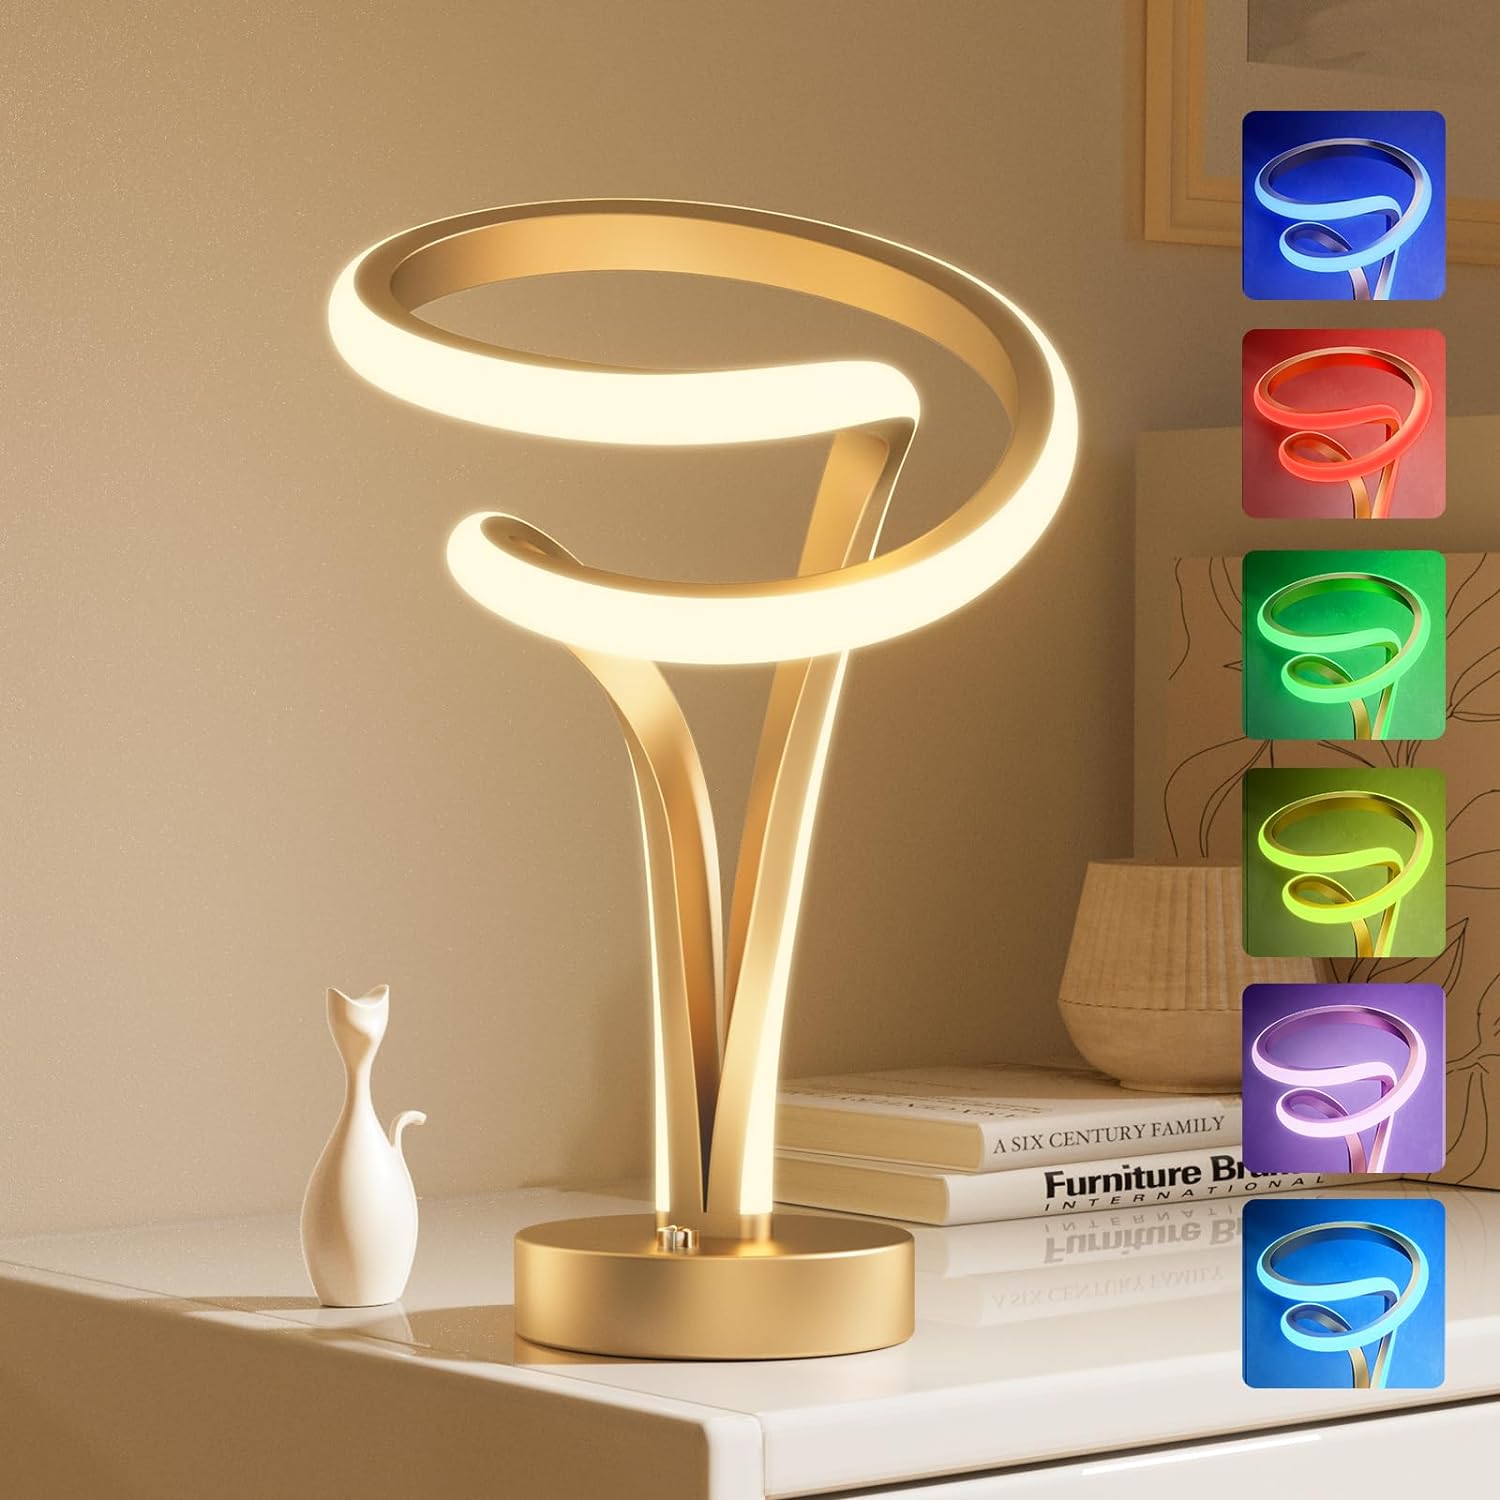 Spiral Table Lamp, 10 Light Modes Color Changing RGB Lamp, Decorative Lamp, Touch Control Dimmable LED Nightstand Lamp, Unique Gold Bedside lamp for Living Room/Bedroom